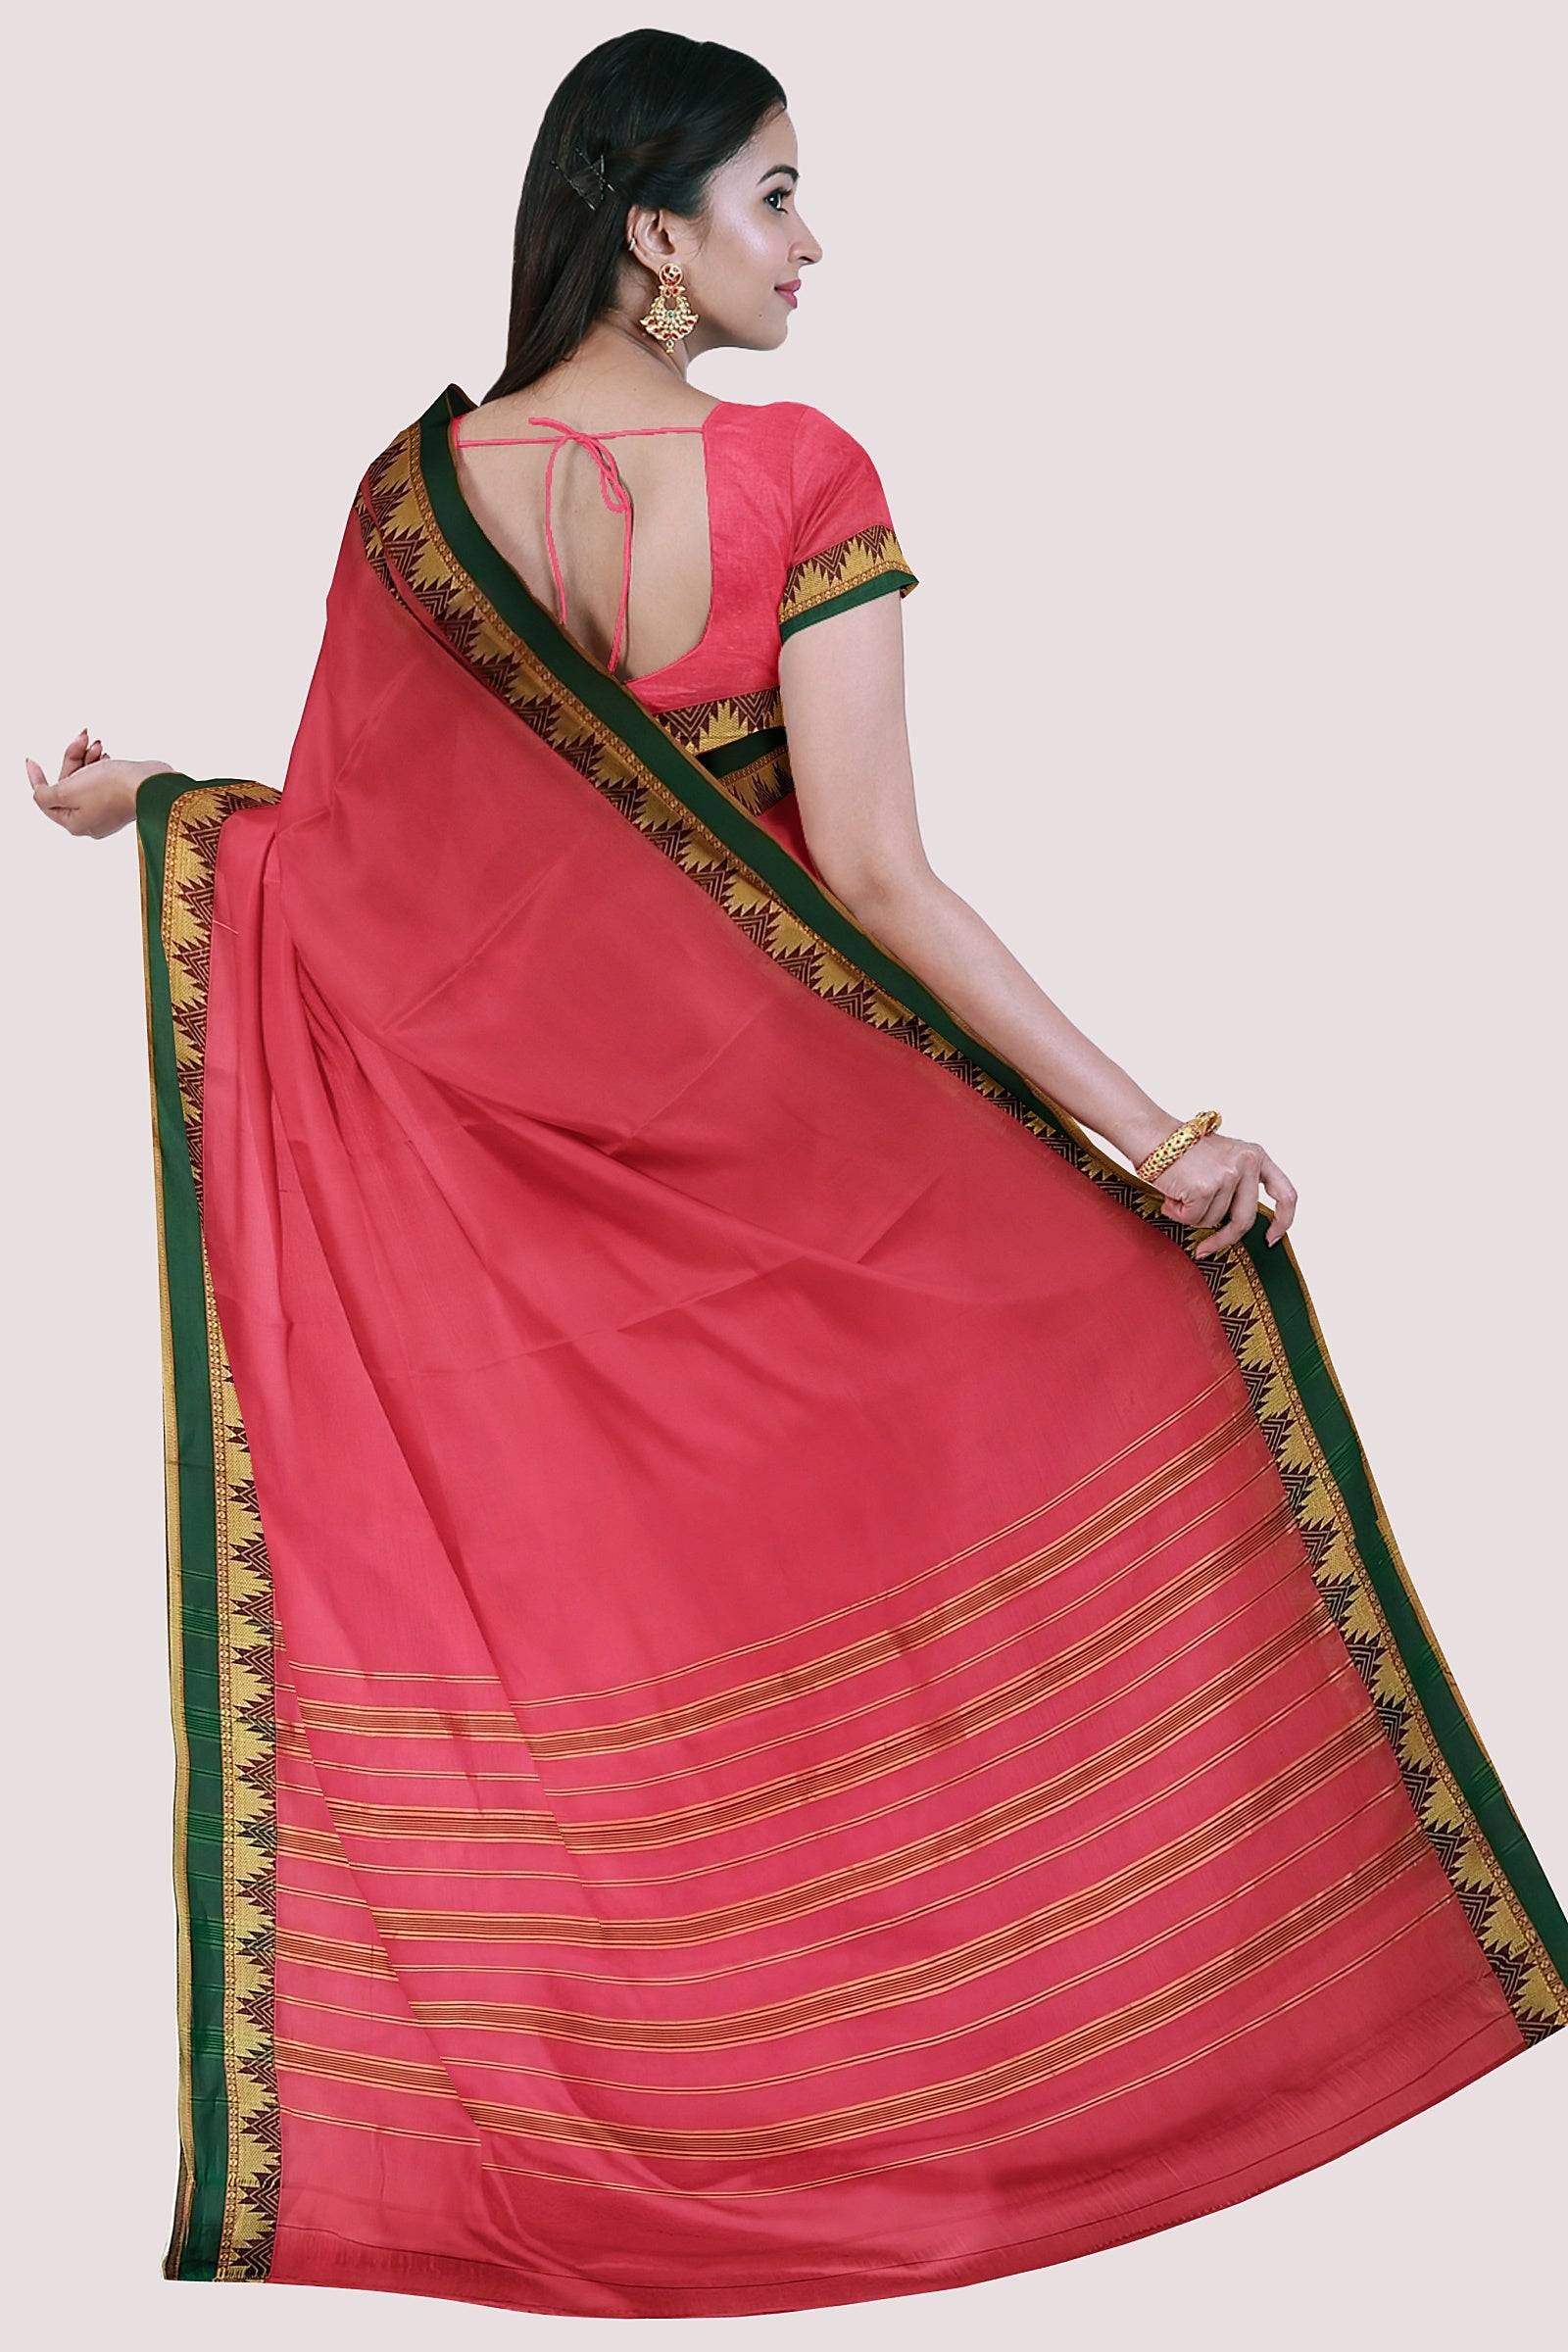 Utsav Fashion Womens Woven Pure South Cotton Saree In Red in Ranchi at best  price by Zaib Rafat Garments Pvt Ltd - Justdial